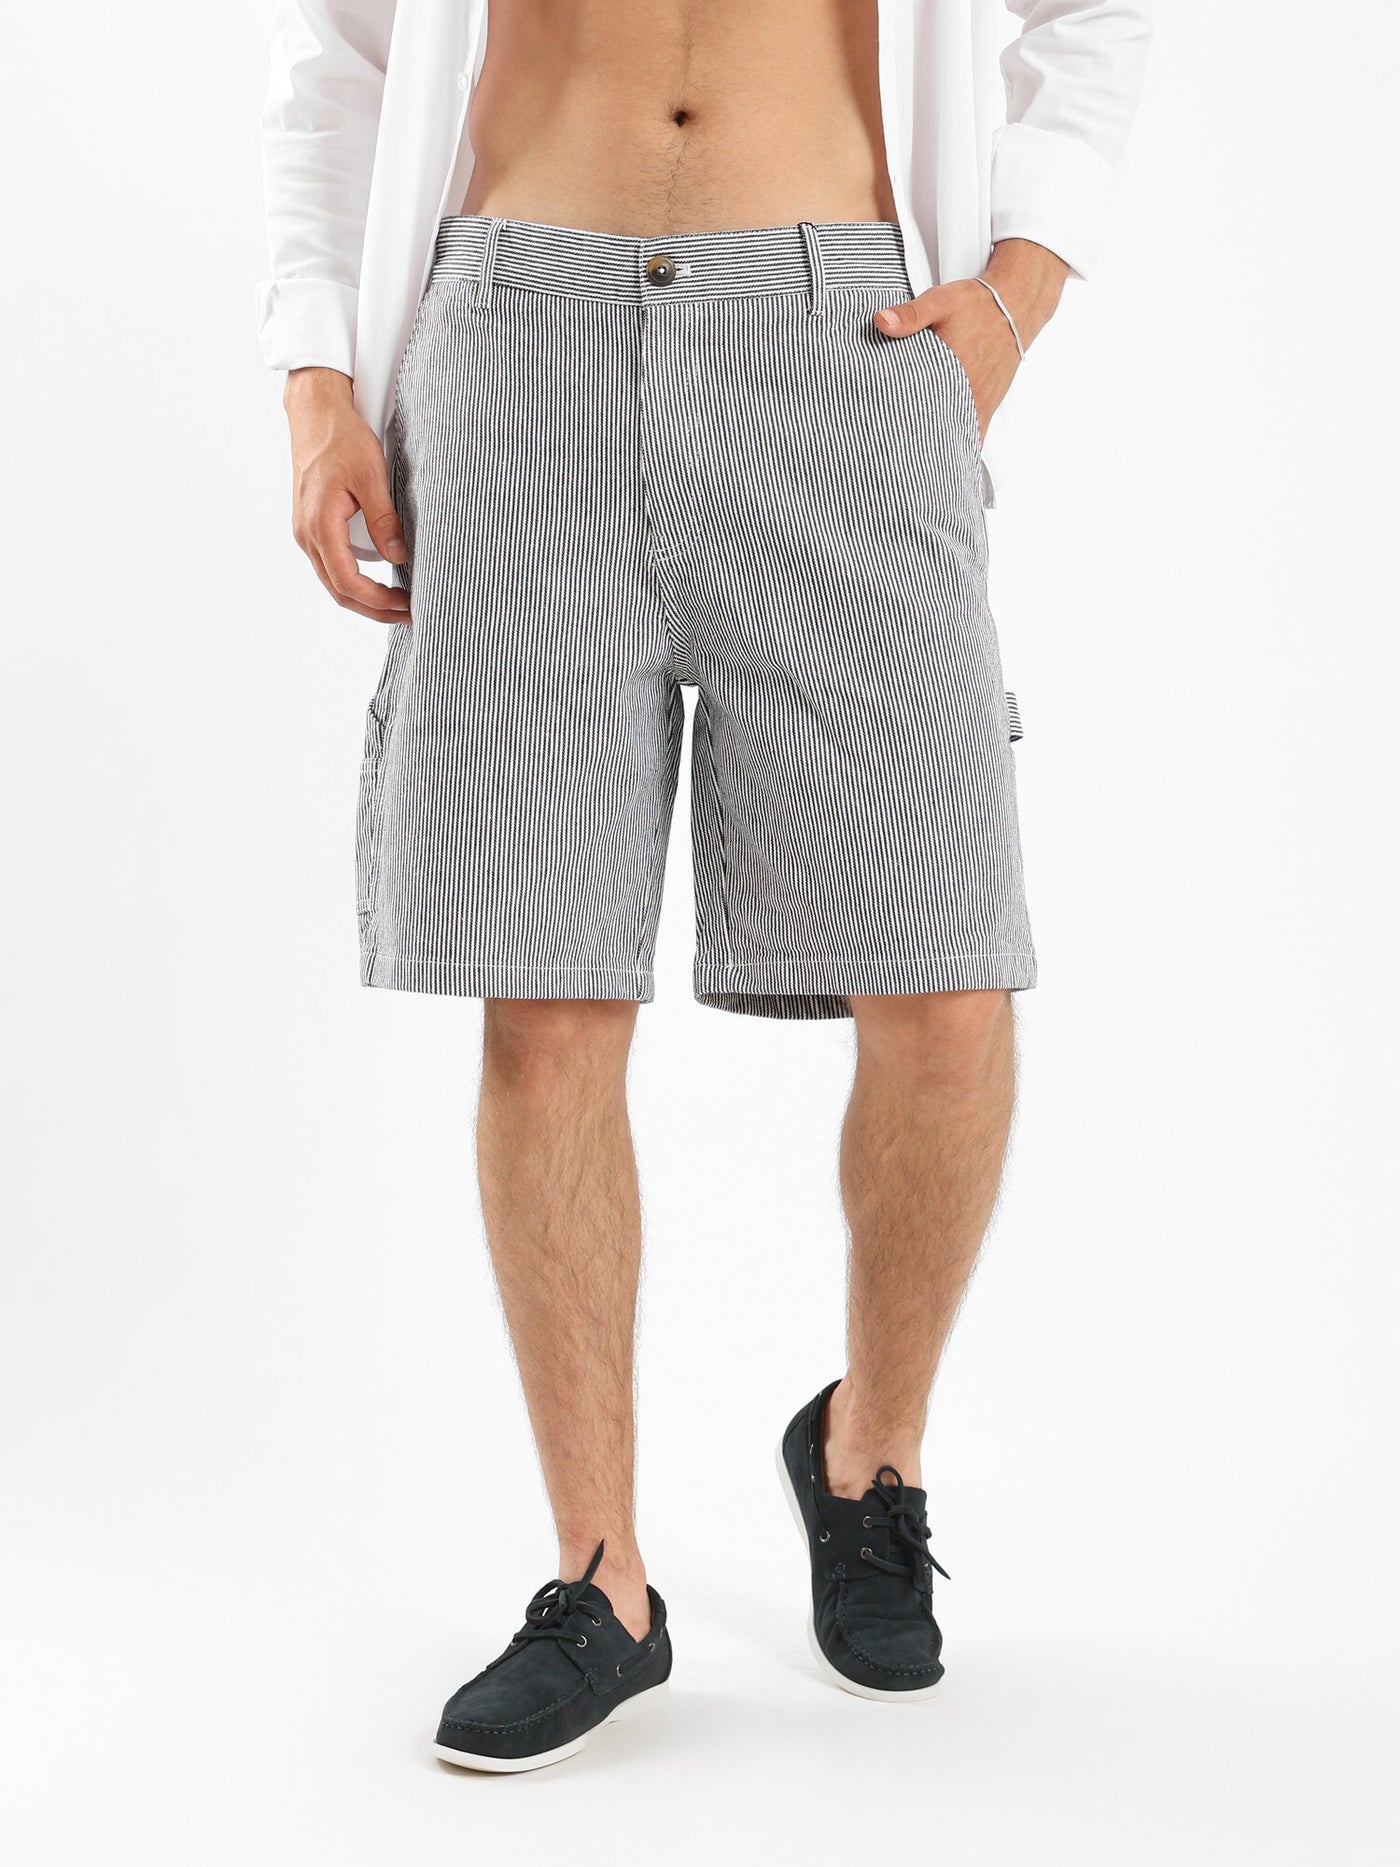 Shorts - Striped - With Pockets